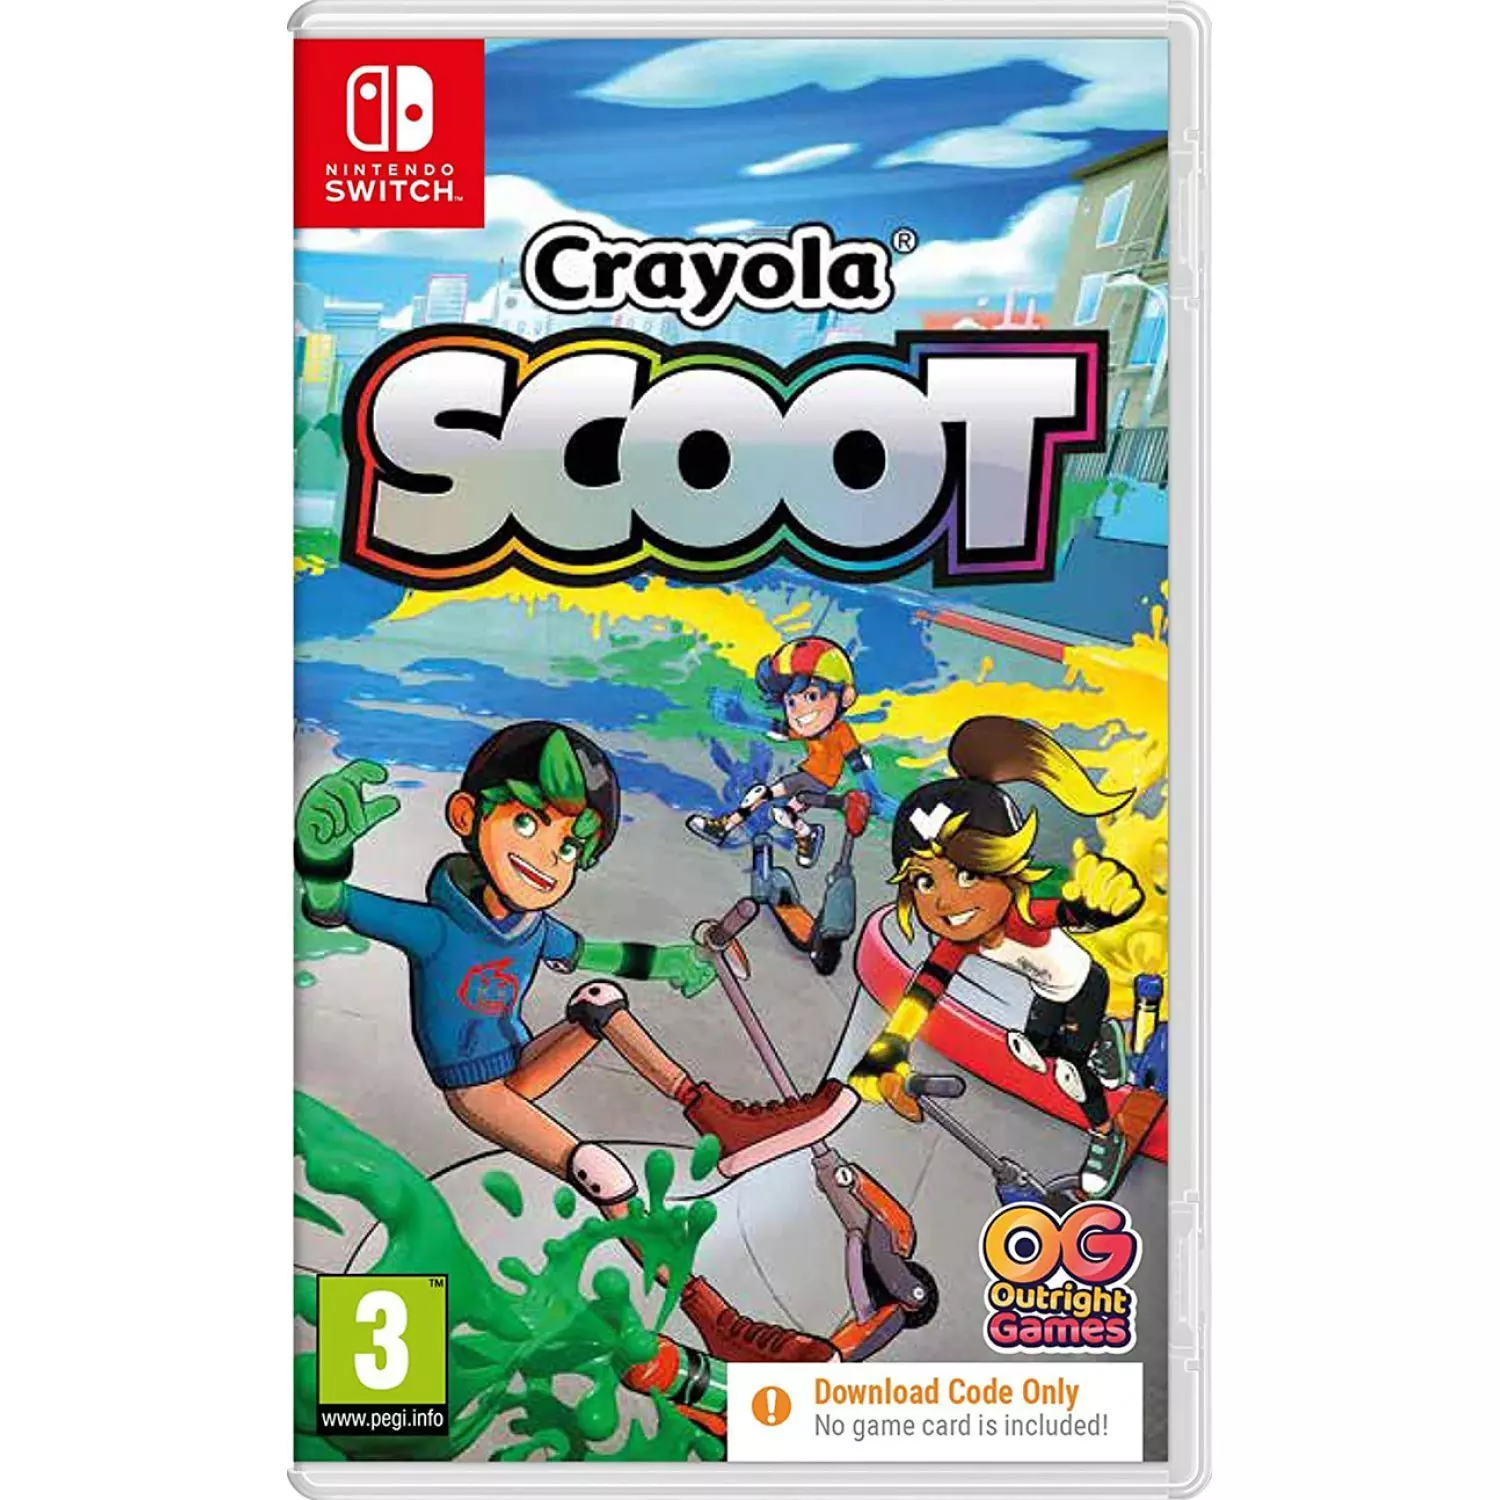 Crayola Scoot Code In A Box